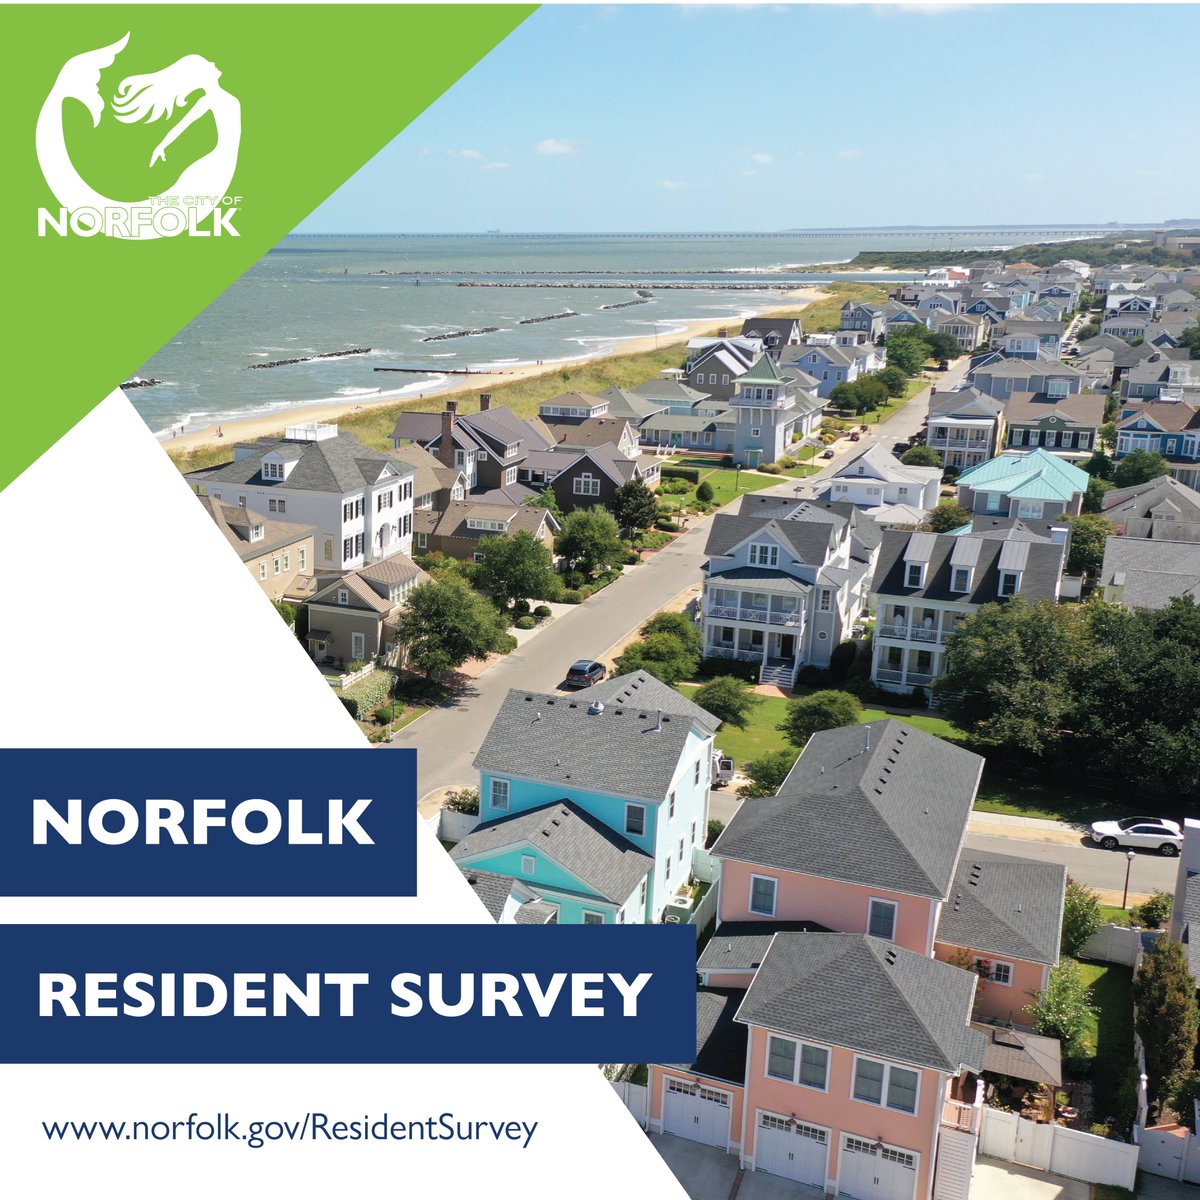 We're working with @etcinstitute to get resident feedback on programs, services & quality of life in #NorfolkVA. Before the survey opens to all residents in early June, some residents will receive a survey invitation in the mail in the coming weeks. 📨 ✅ norfolk.gov/ResidentSurvey